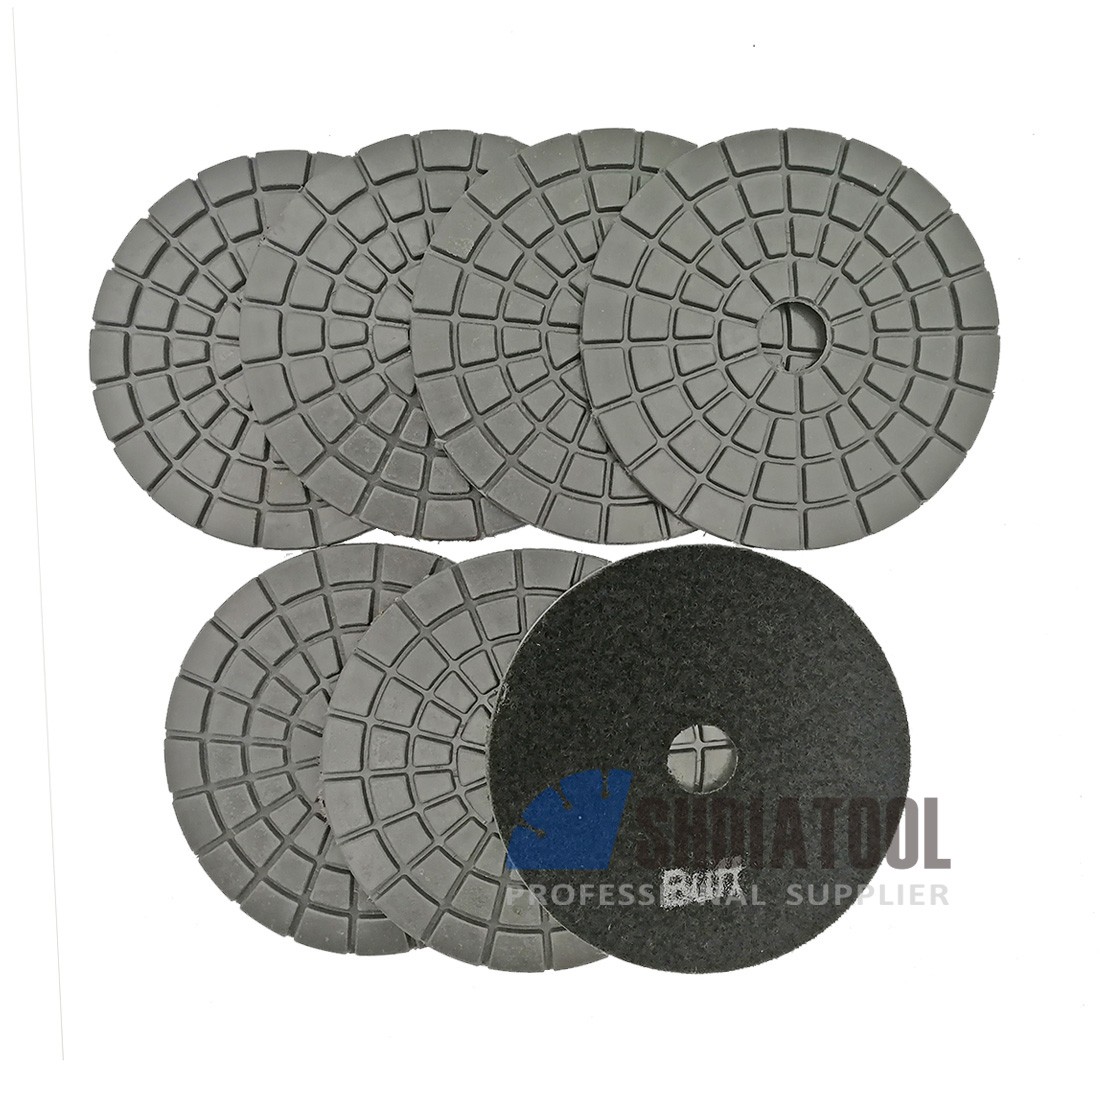 Professional Wet Polishing Pads for Marble Granite (2 sizes)